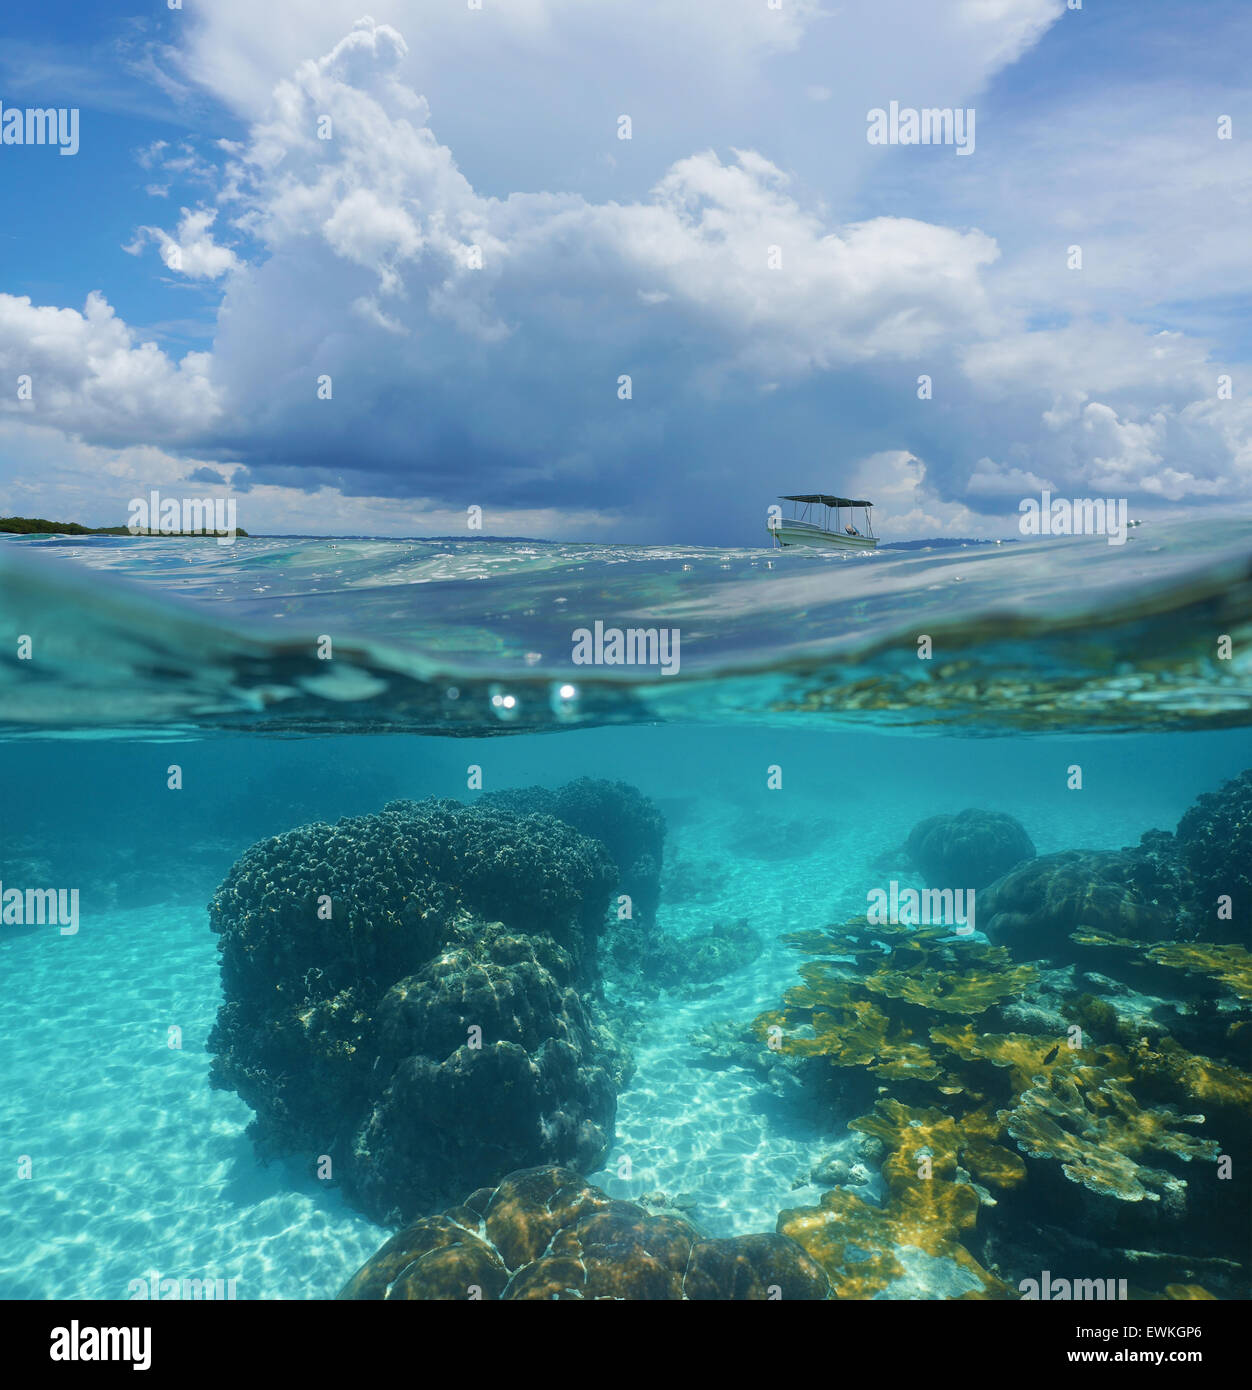 Split image with corals underwater and threatening cloud with a boat above waterline, Caribbean sea, Panama Stock Photo